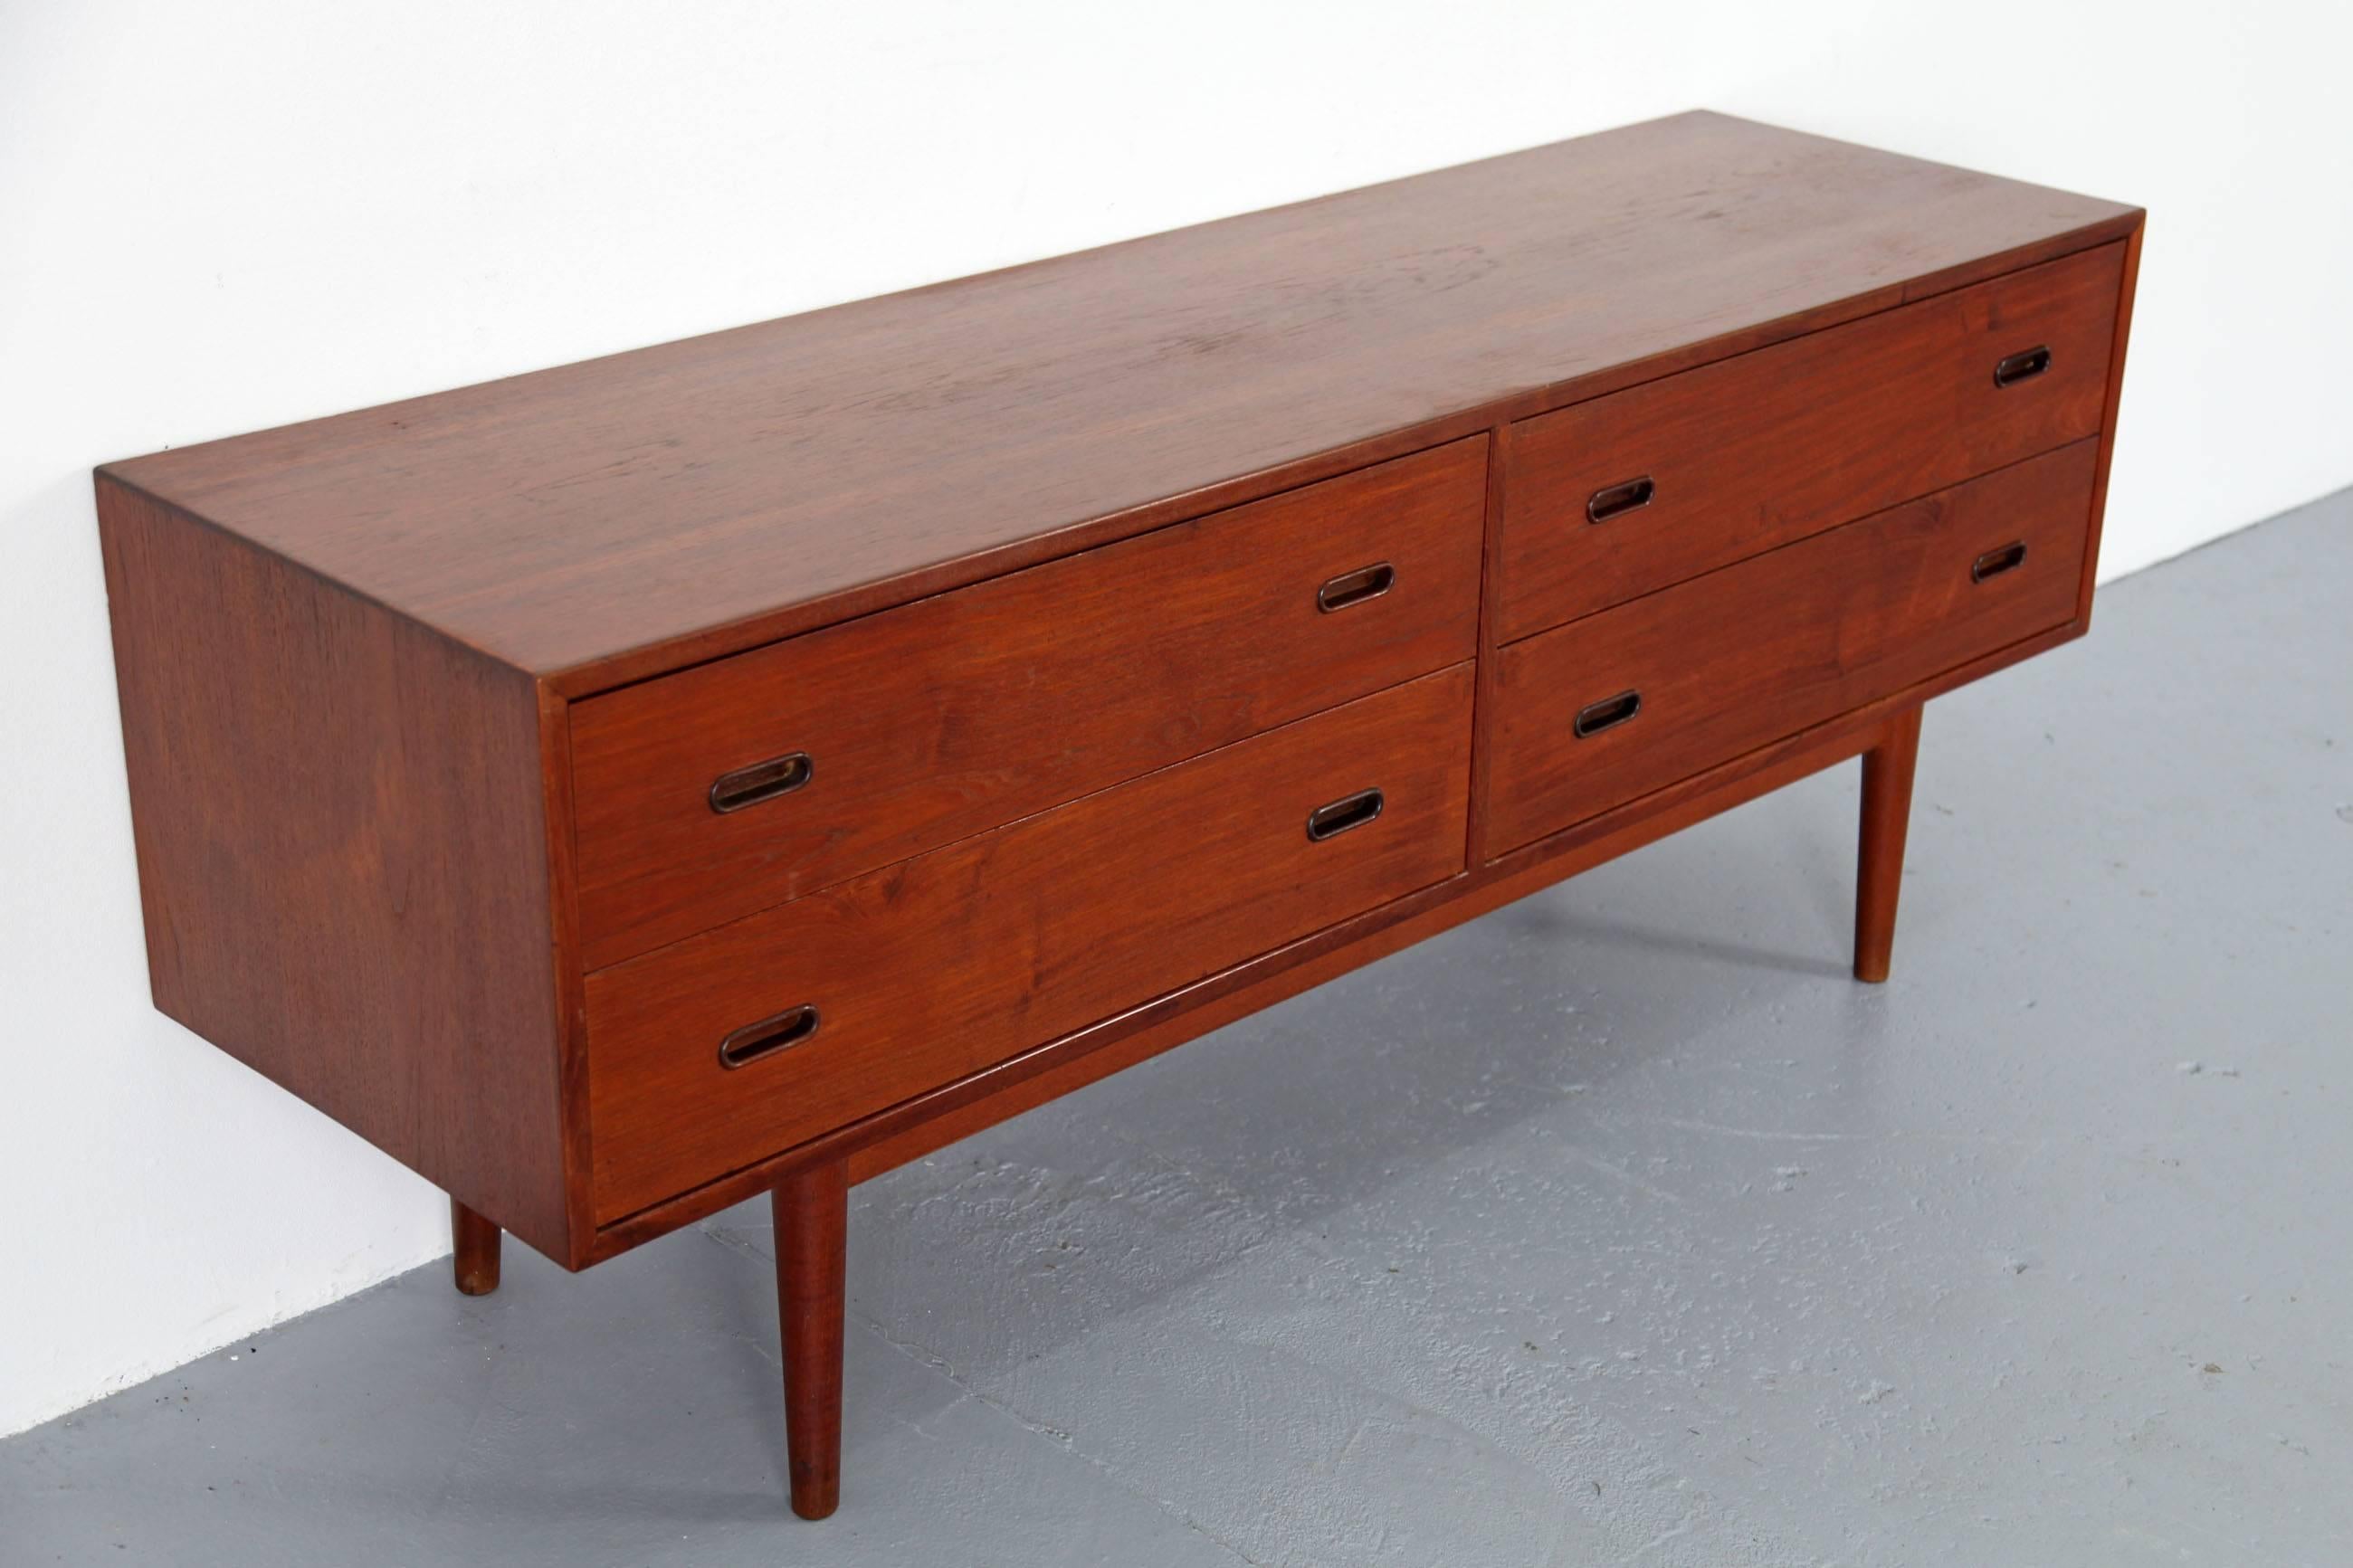 Scandinavian Modern Rare Chest of Drawers by Arne Vodder, Produced by Sibast